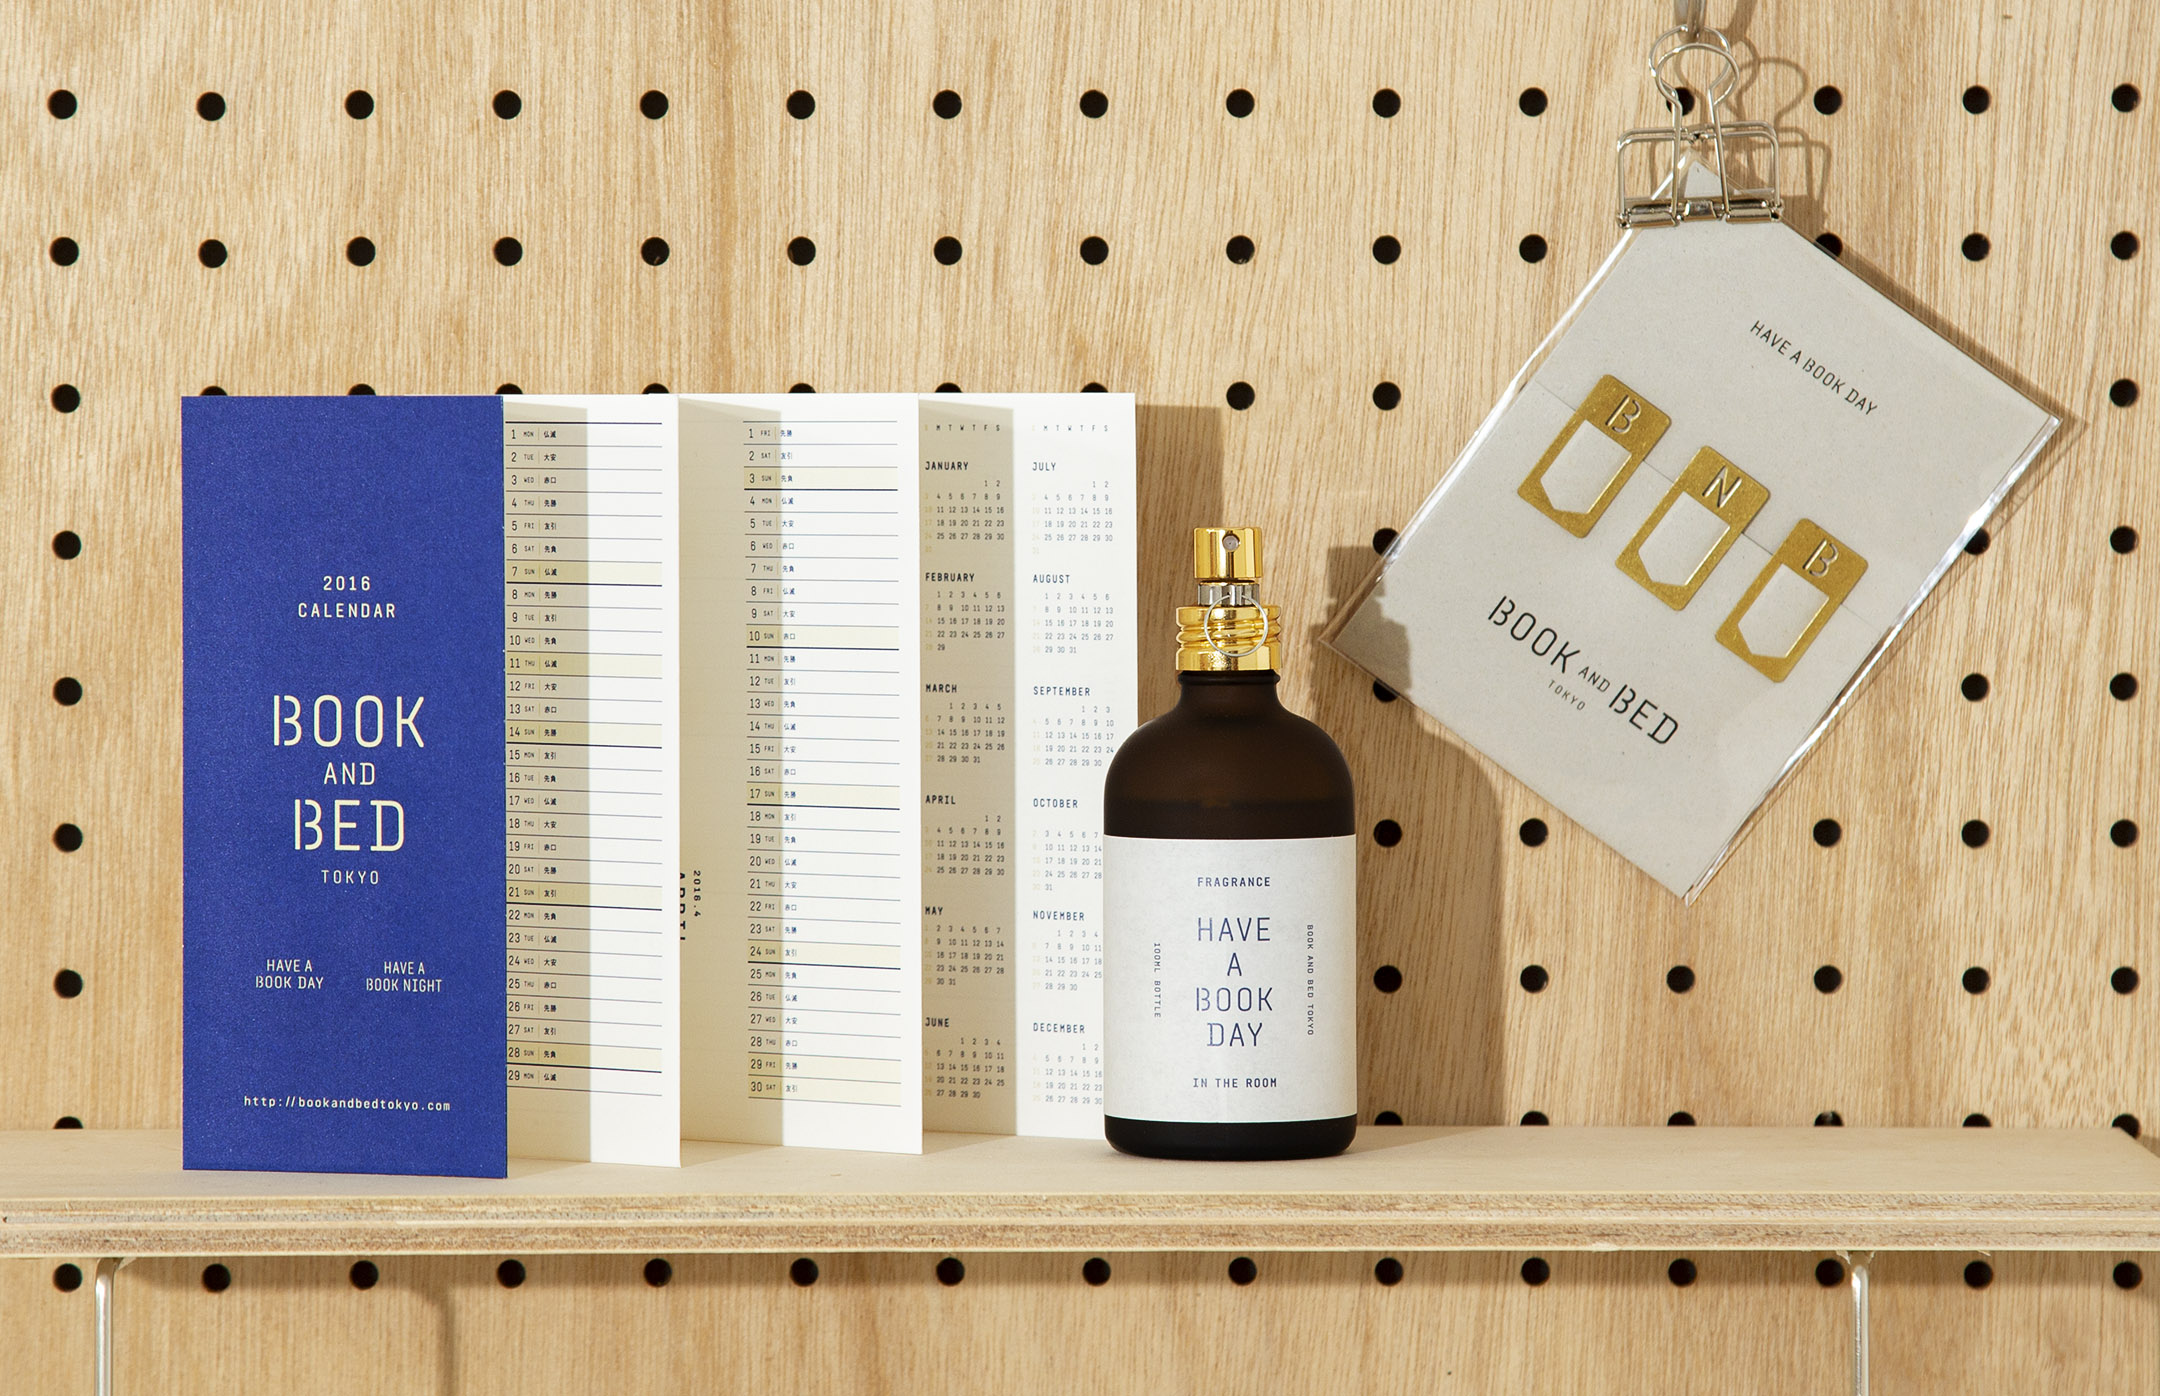 soda design HAVE A BOOK DAY “BOOK AND BED”